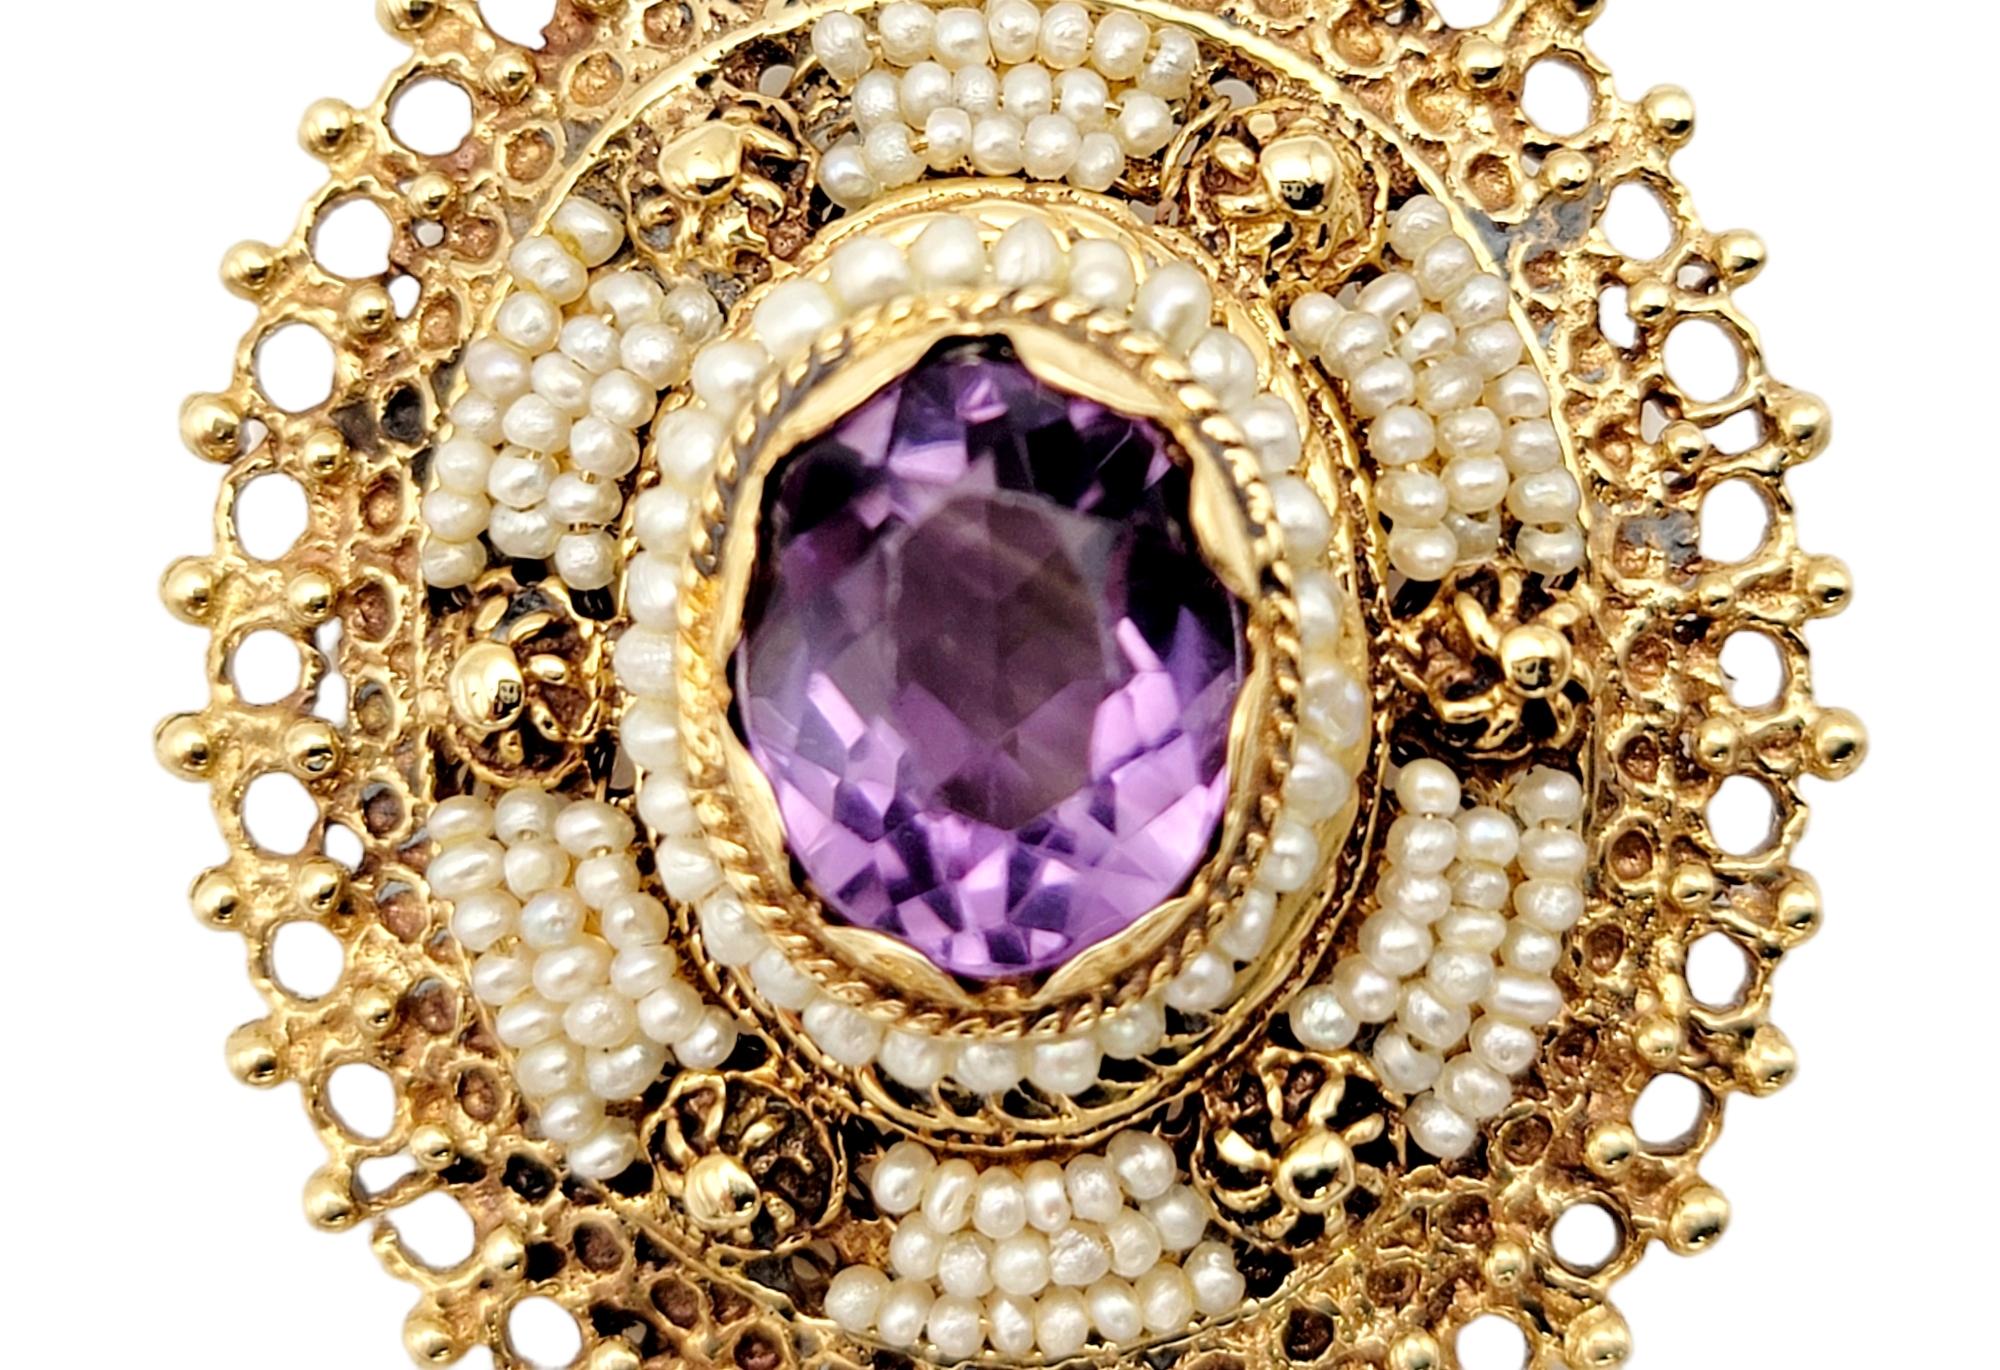 Charming amethyst and pearl brooch/pendant surrounded by a beautifully detailed 14 karat yellow gold filigree design.

Type: Brooch / Pendant
Metal: 14K Yellow Gold 
Natural Amethyst: 2.68 ctw 
Amethyst Cut: Oval
Amethyst color: Medium Light